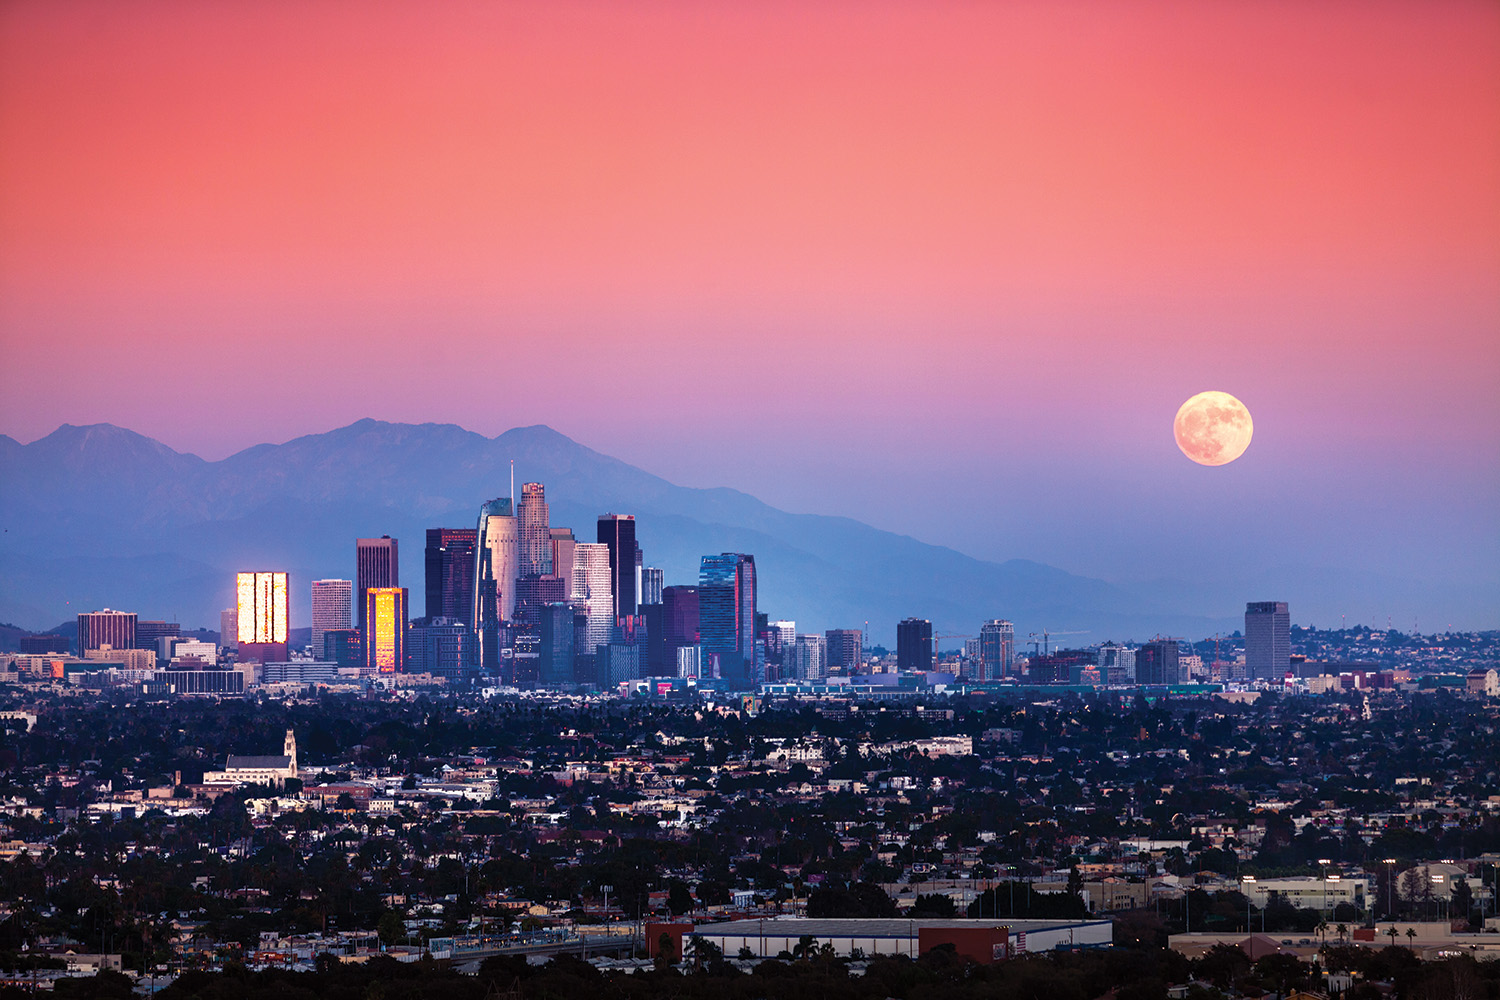 A sunset in hues of pink above the city skyline of Los Angeles, with skyscrapers in the background and residential areas and trees in the foreground. A full moon hangs low in the sky to the right.